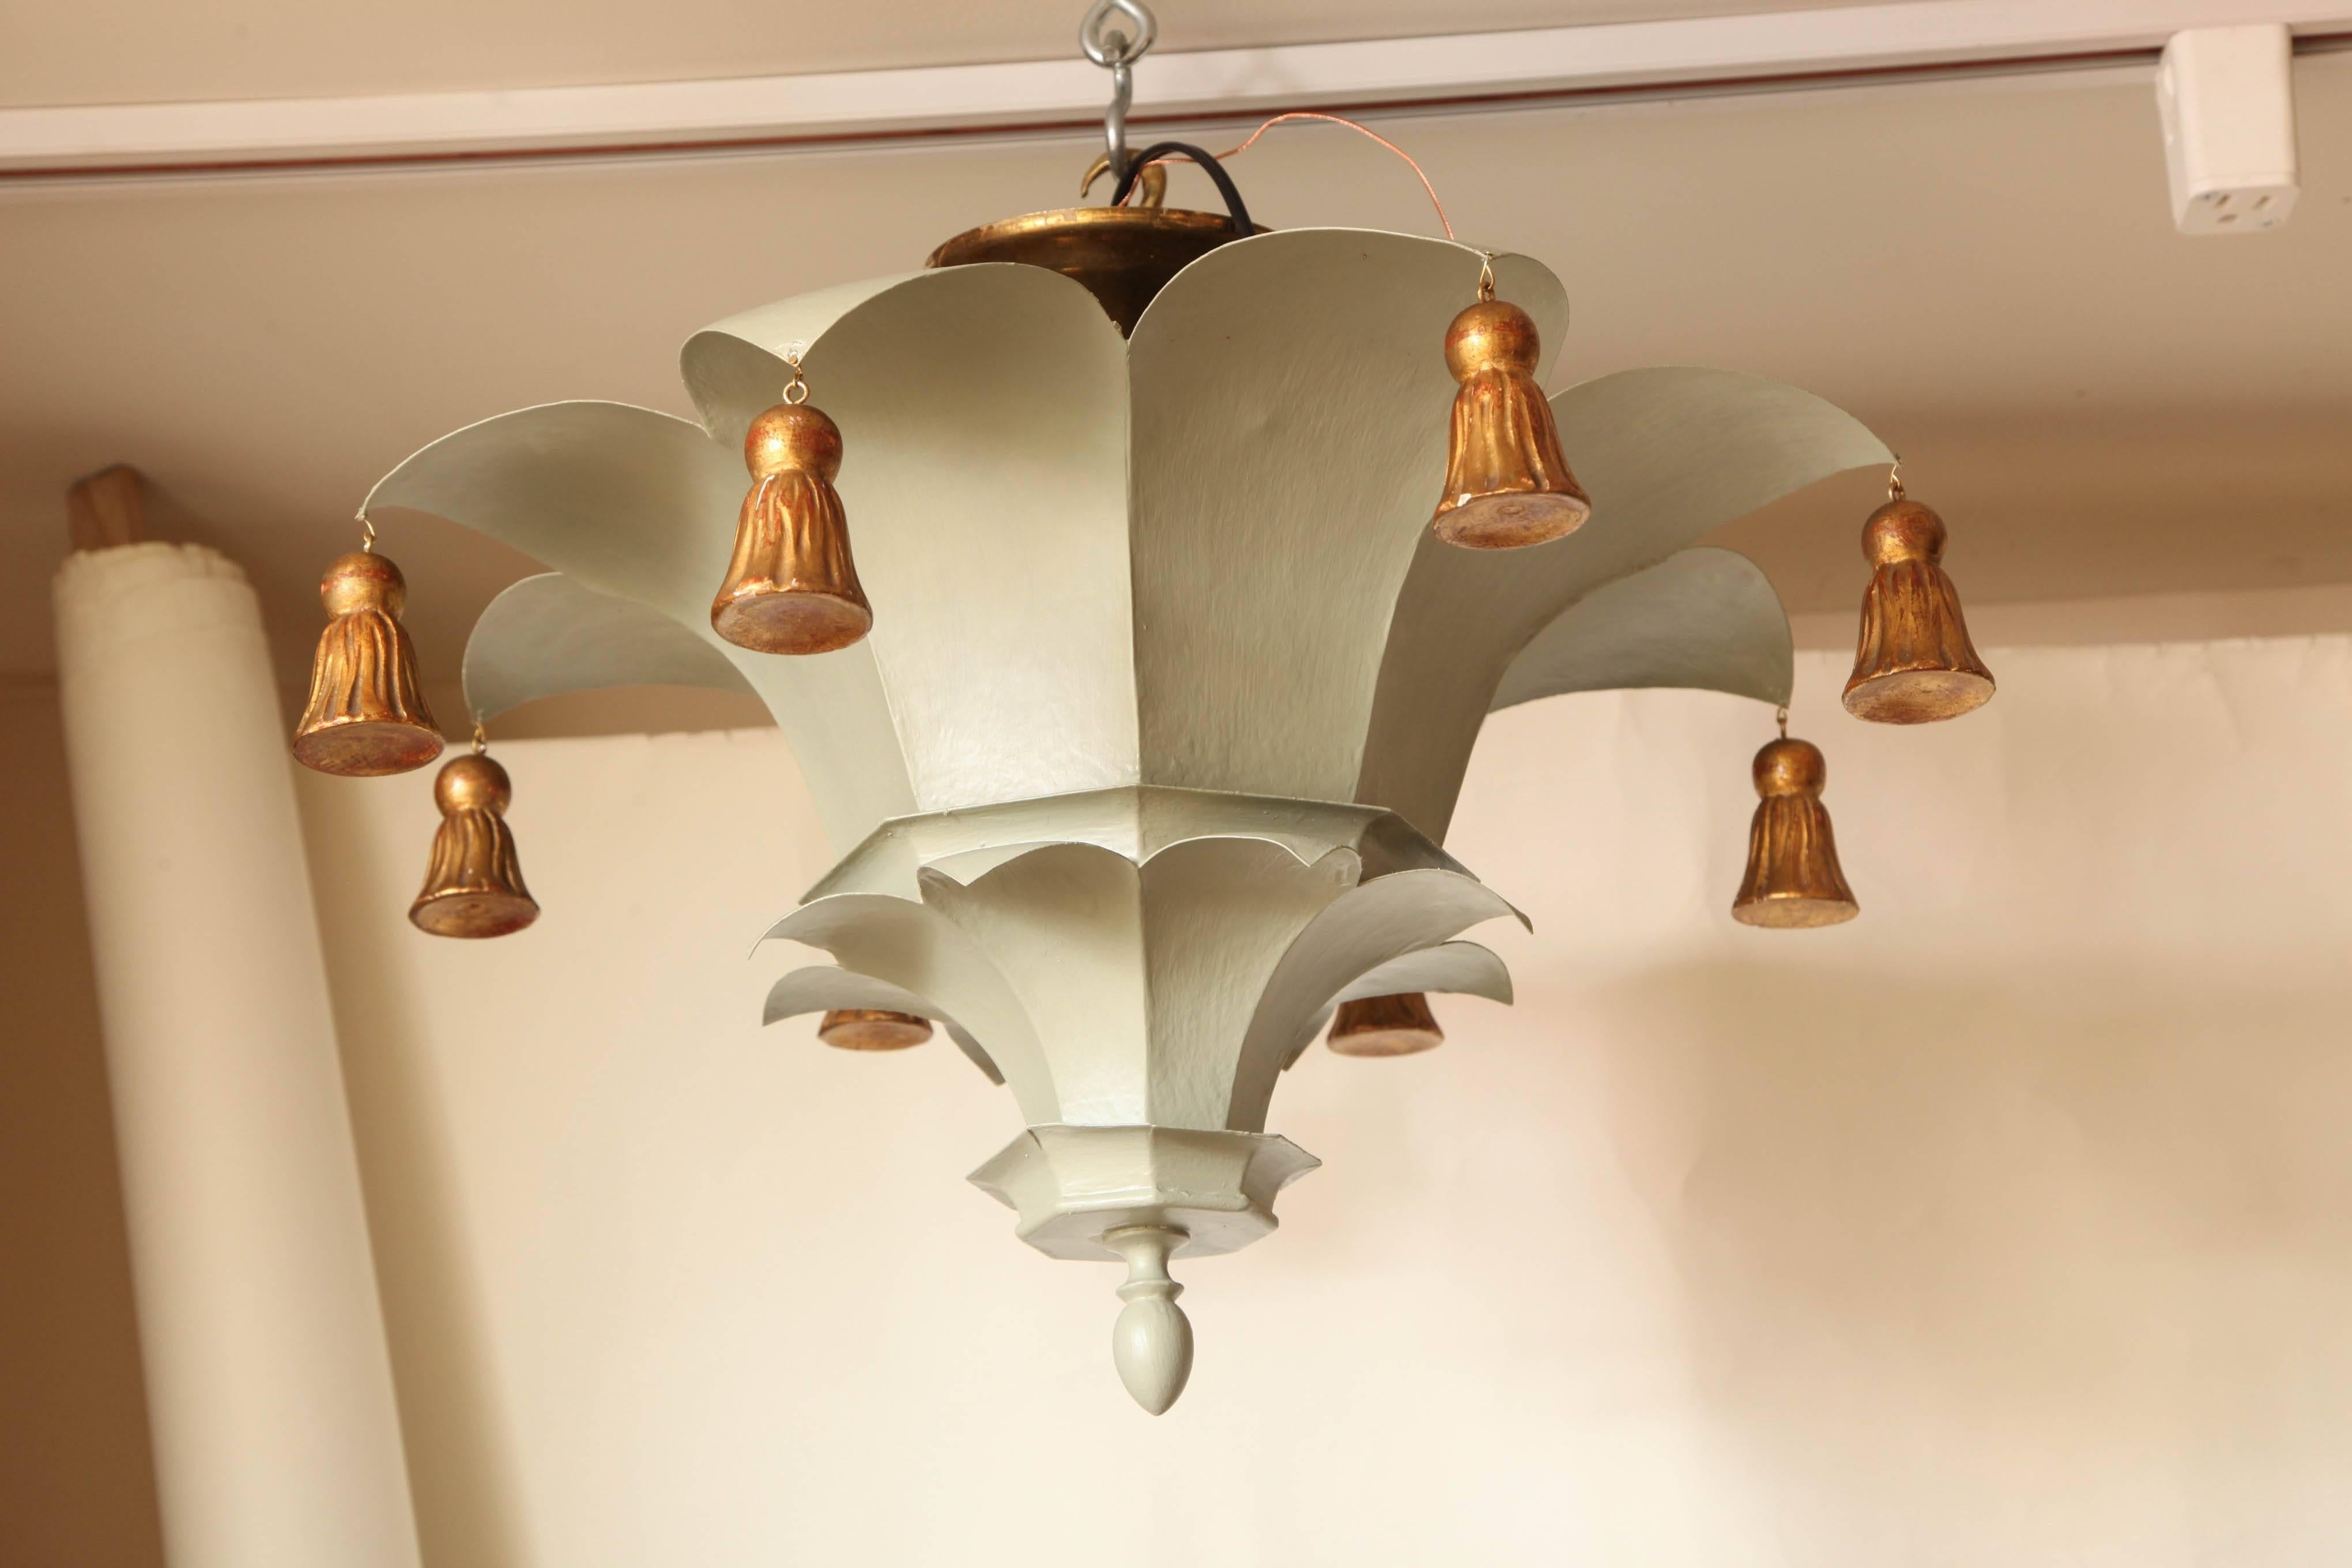 A French tole ceiling fixture in the form of an inverted celadon green Chinese parasol, each corner having a carved in gilt wood bells, interior fitted with two Edison sockets, maximum wattage 120 watts. Circa 1950.